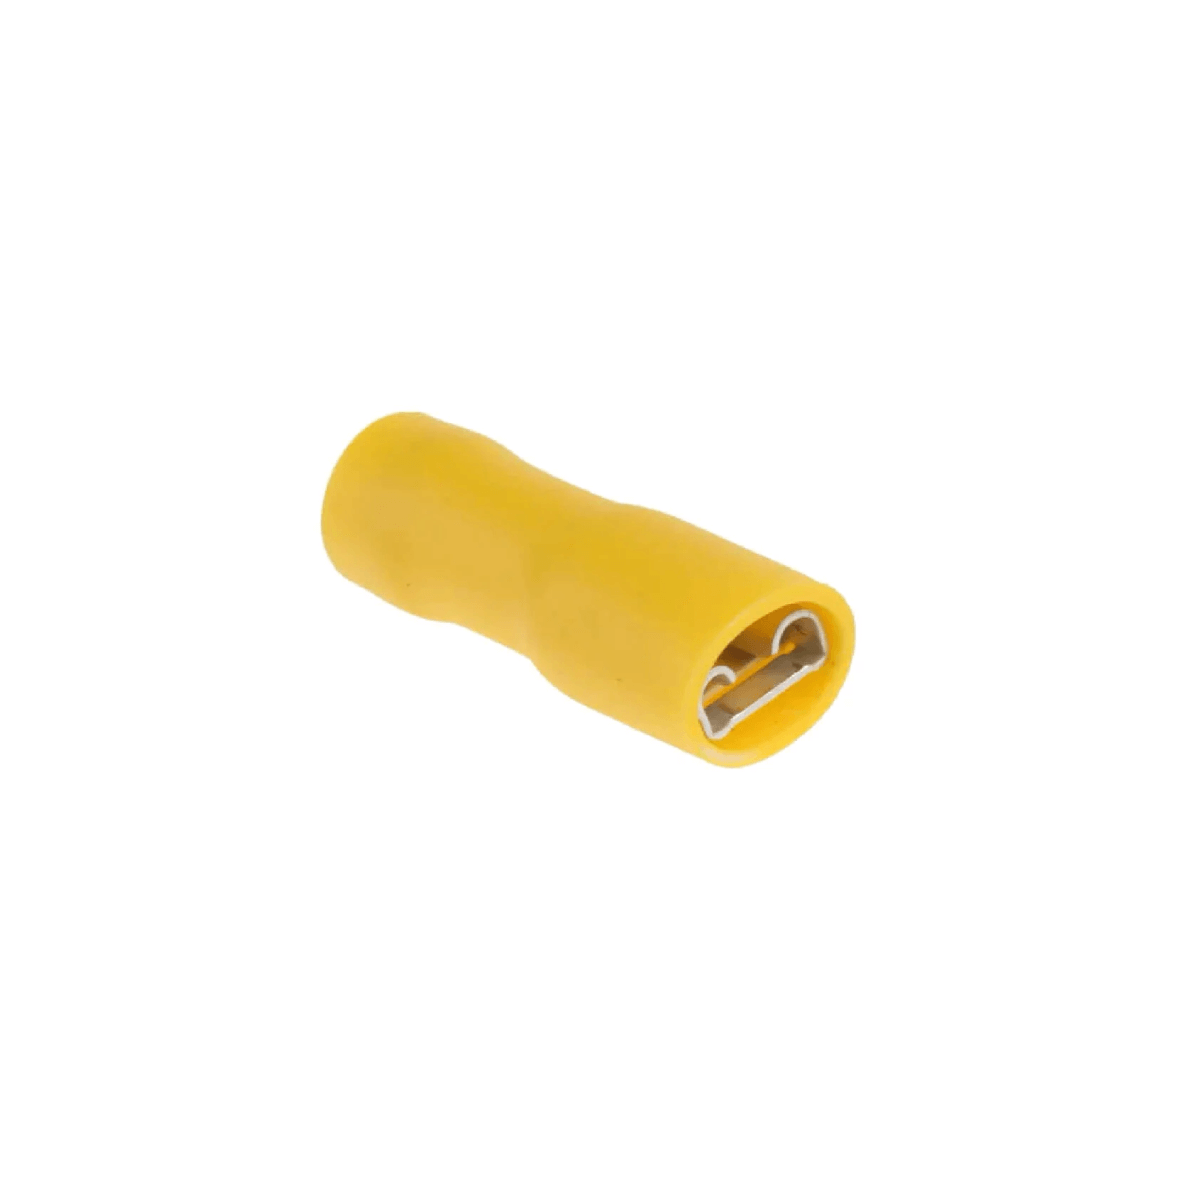 Yellow / 3-6mm² - Female spade (6.3mm) crimp connector - pack of 10